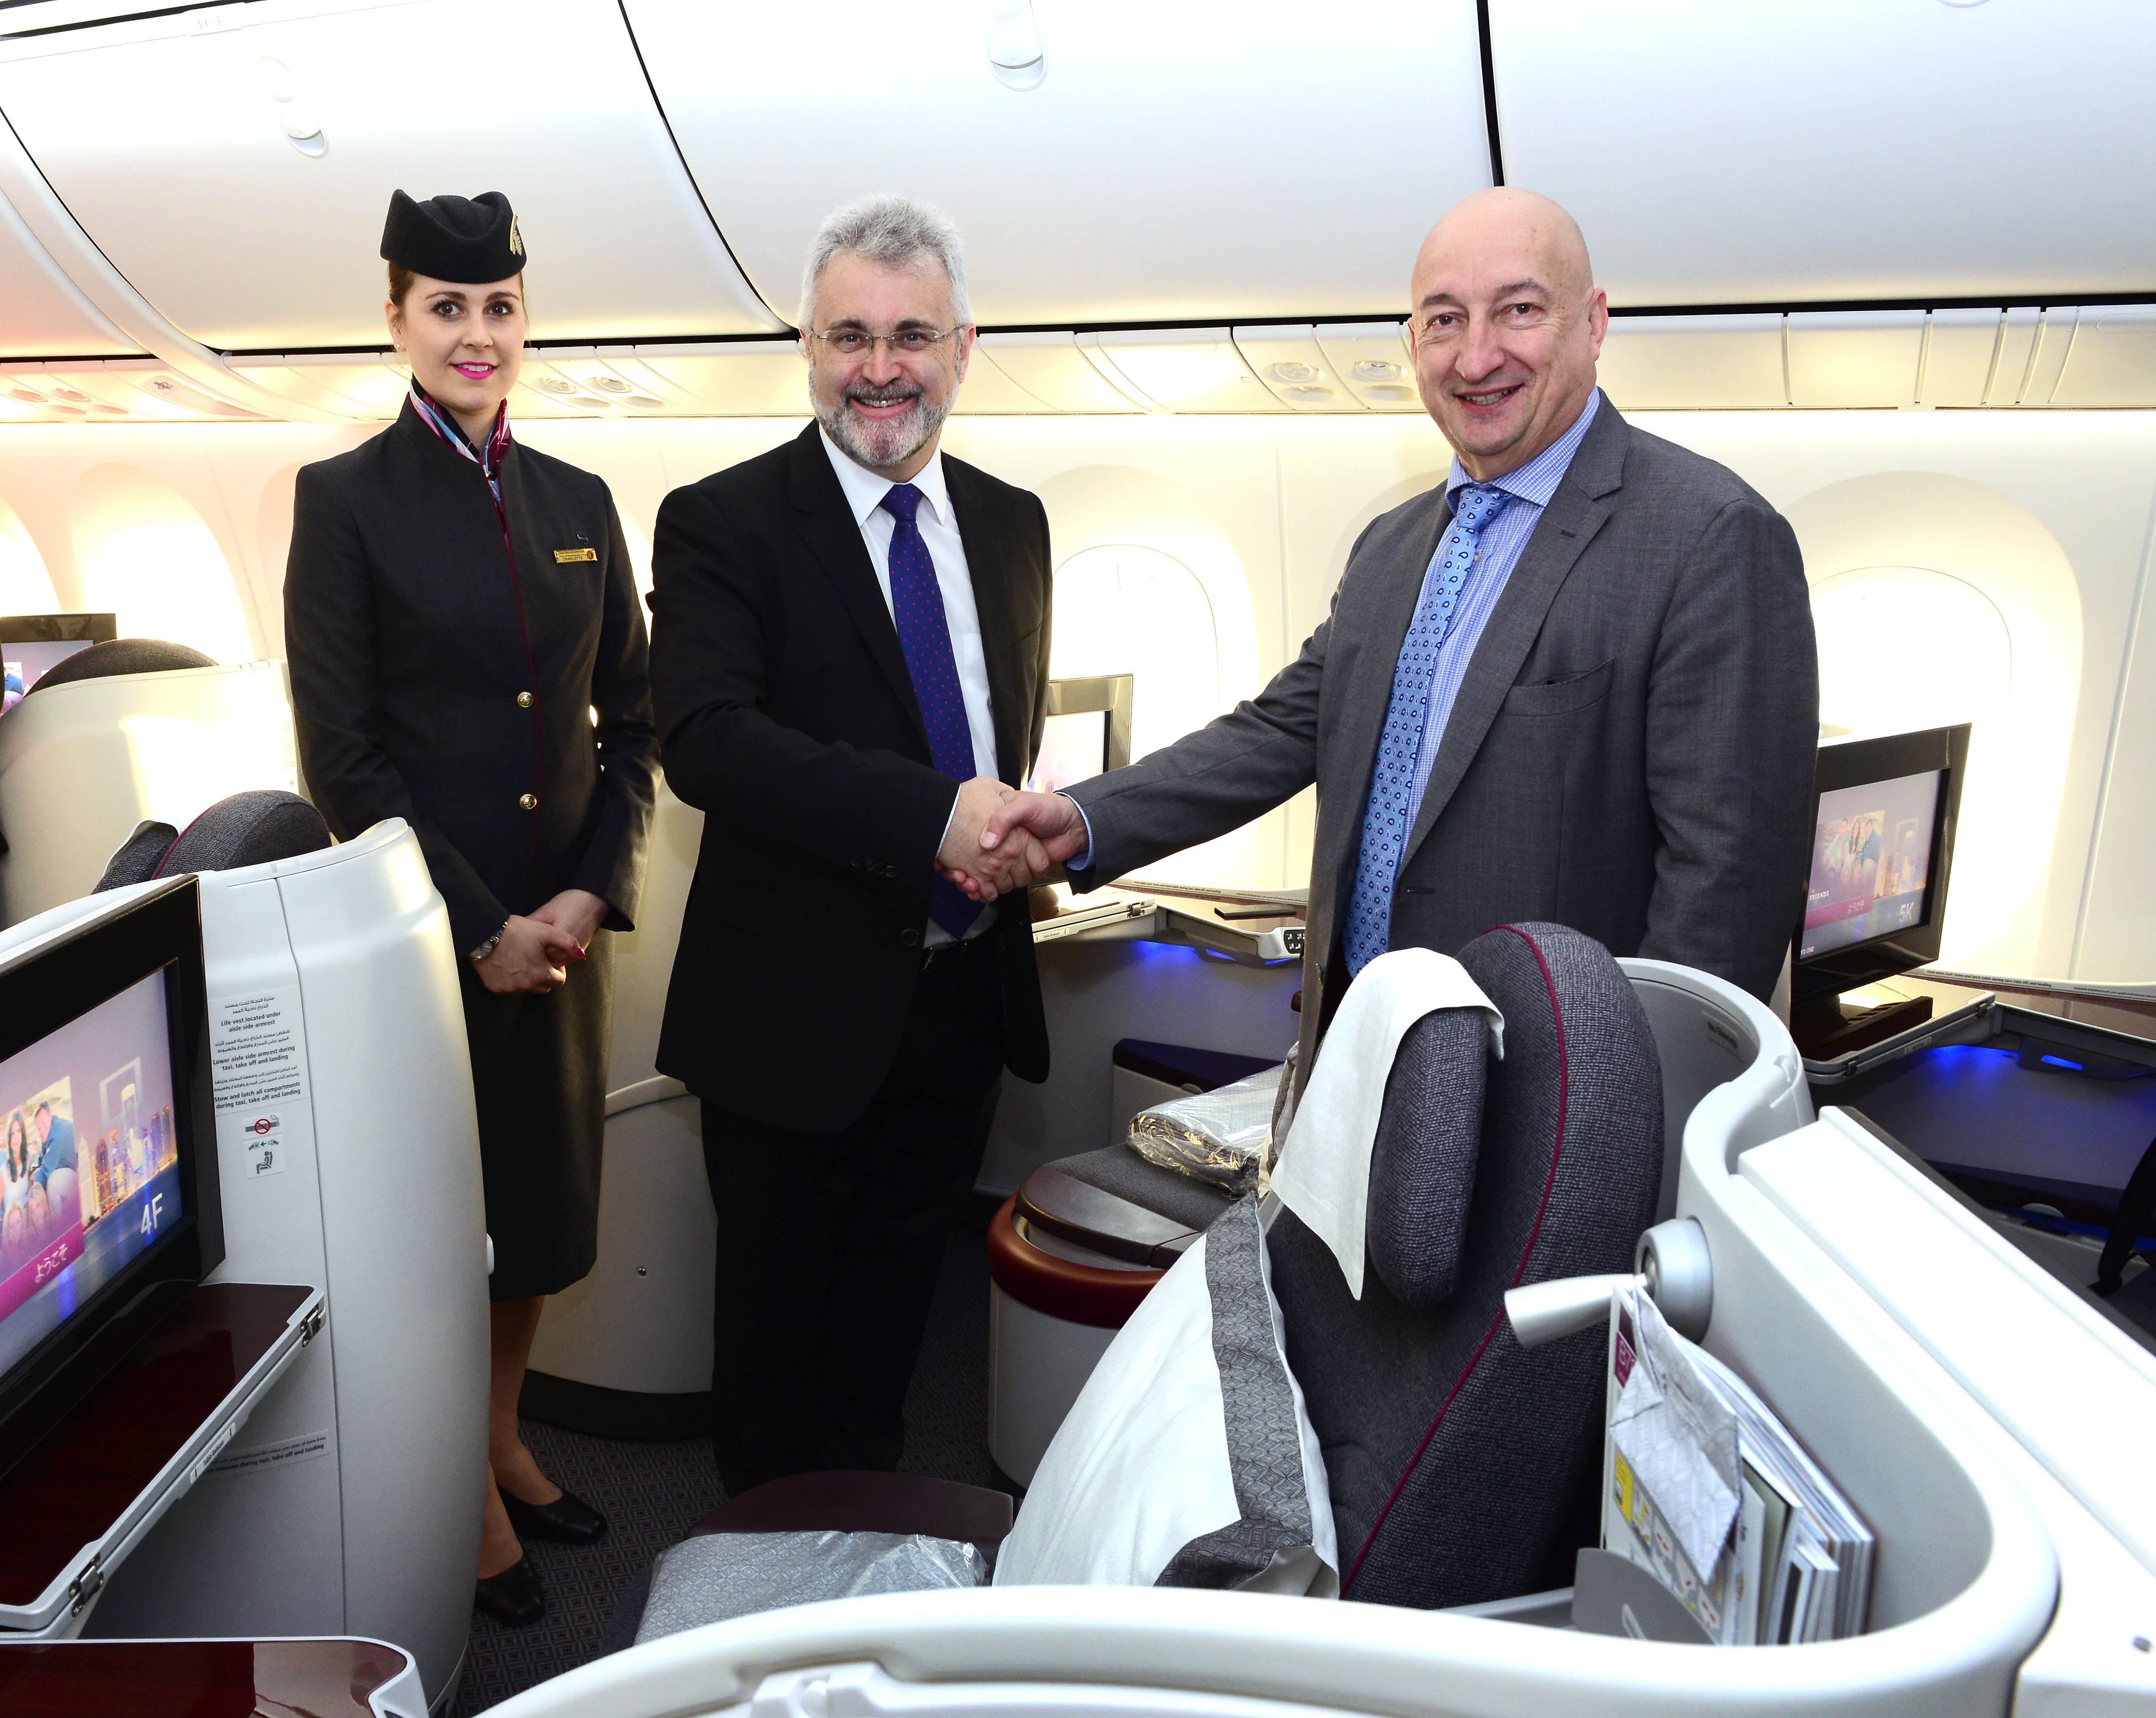 Qatar Airways’ Chief Commercial Officer, Dr. Hugh Dunleavy (right), who travelled on board the inaugural flight was greeted by Birmingham Airport’s Chief Executive Officer, Mr. Paul Kehoe (left). Picture by Qatar Airways.